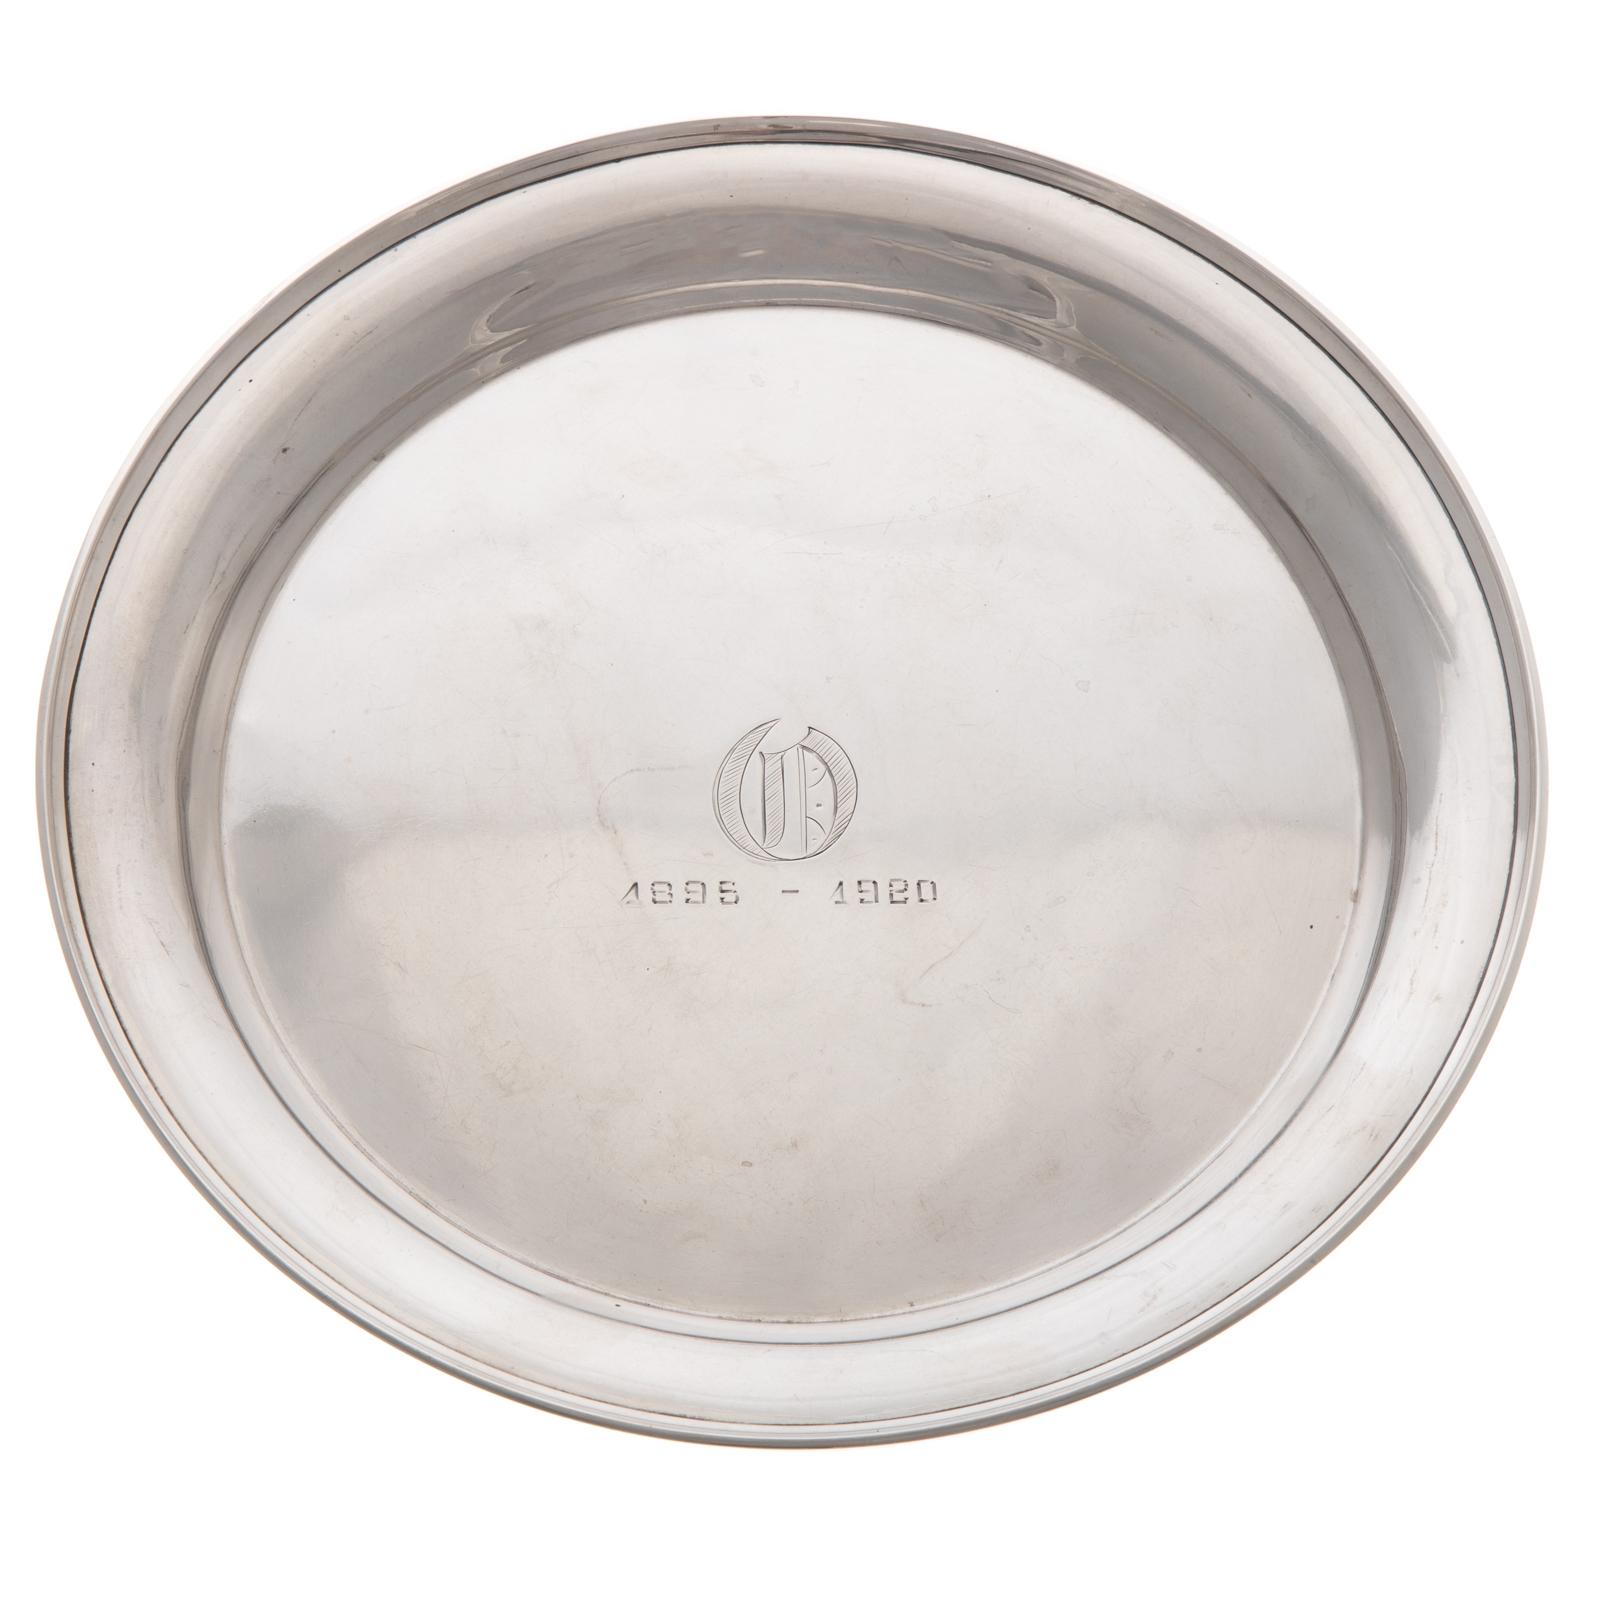 SCHOFIELD STERLING SERVING TRAY 287d44